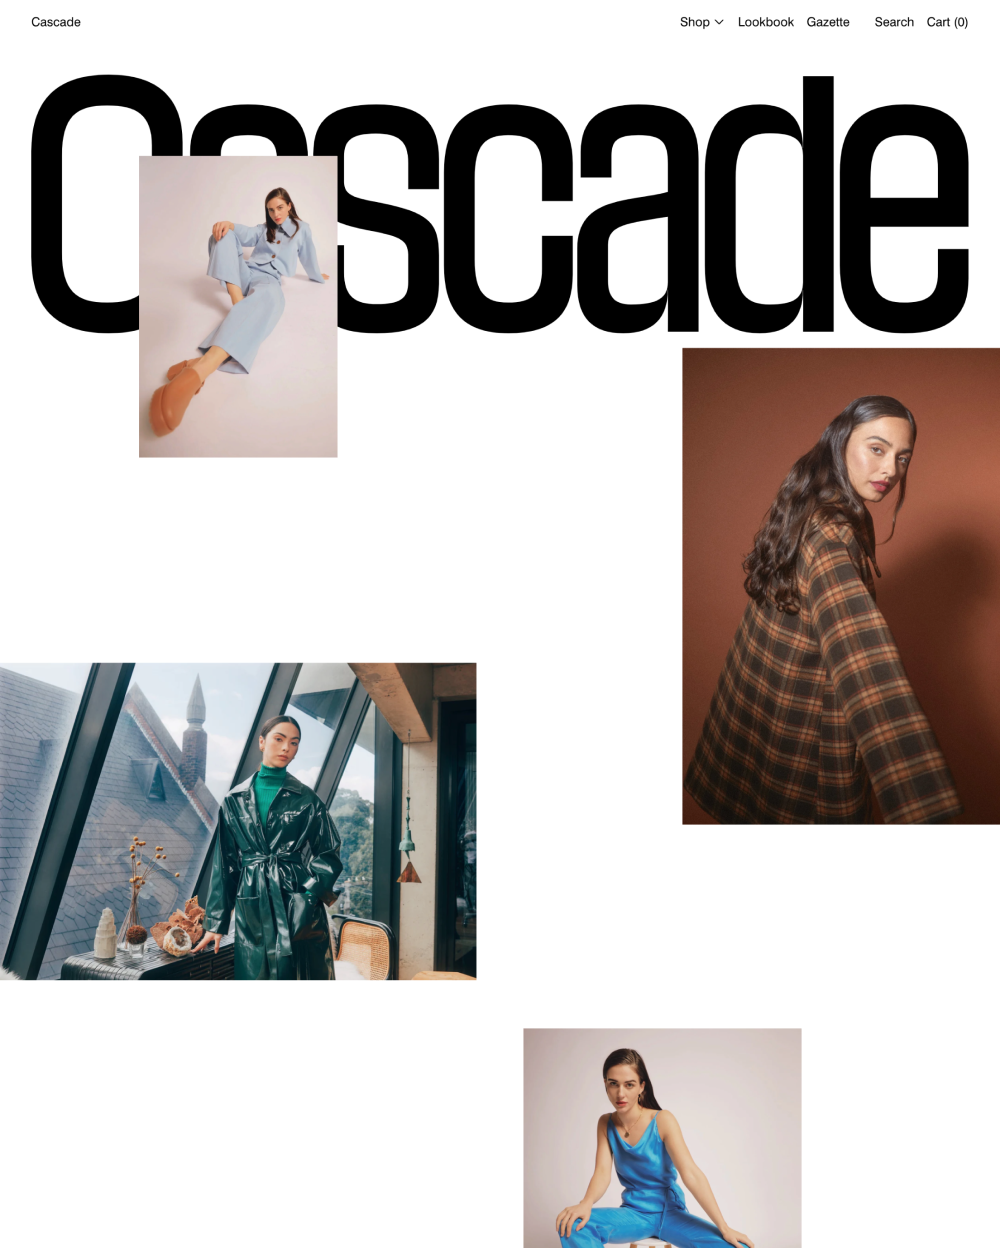 reviews Cascade by Switch for shopify